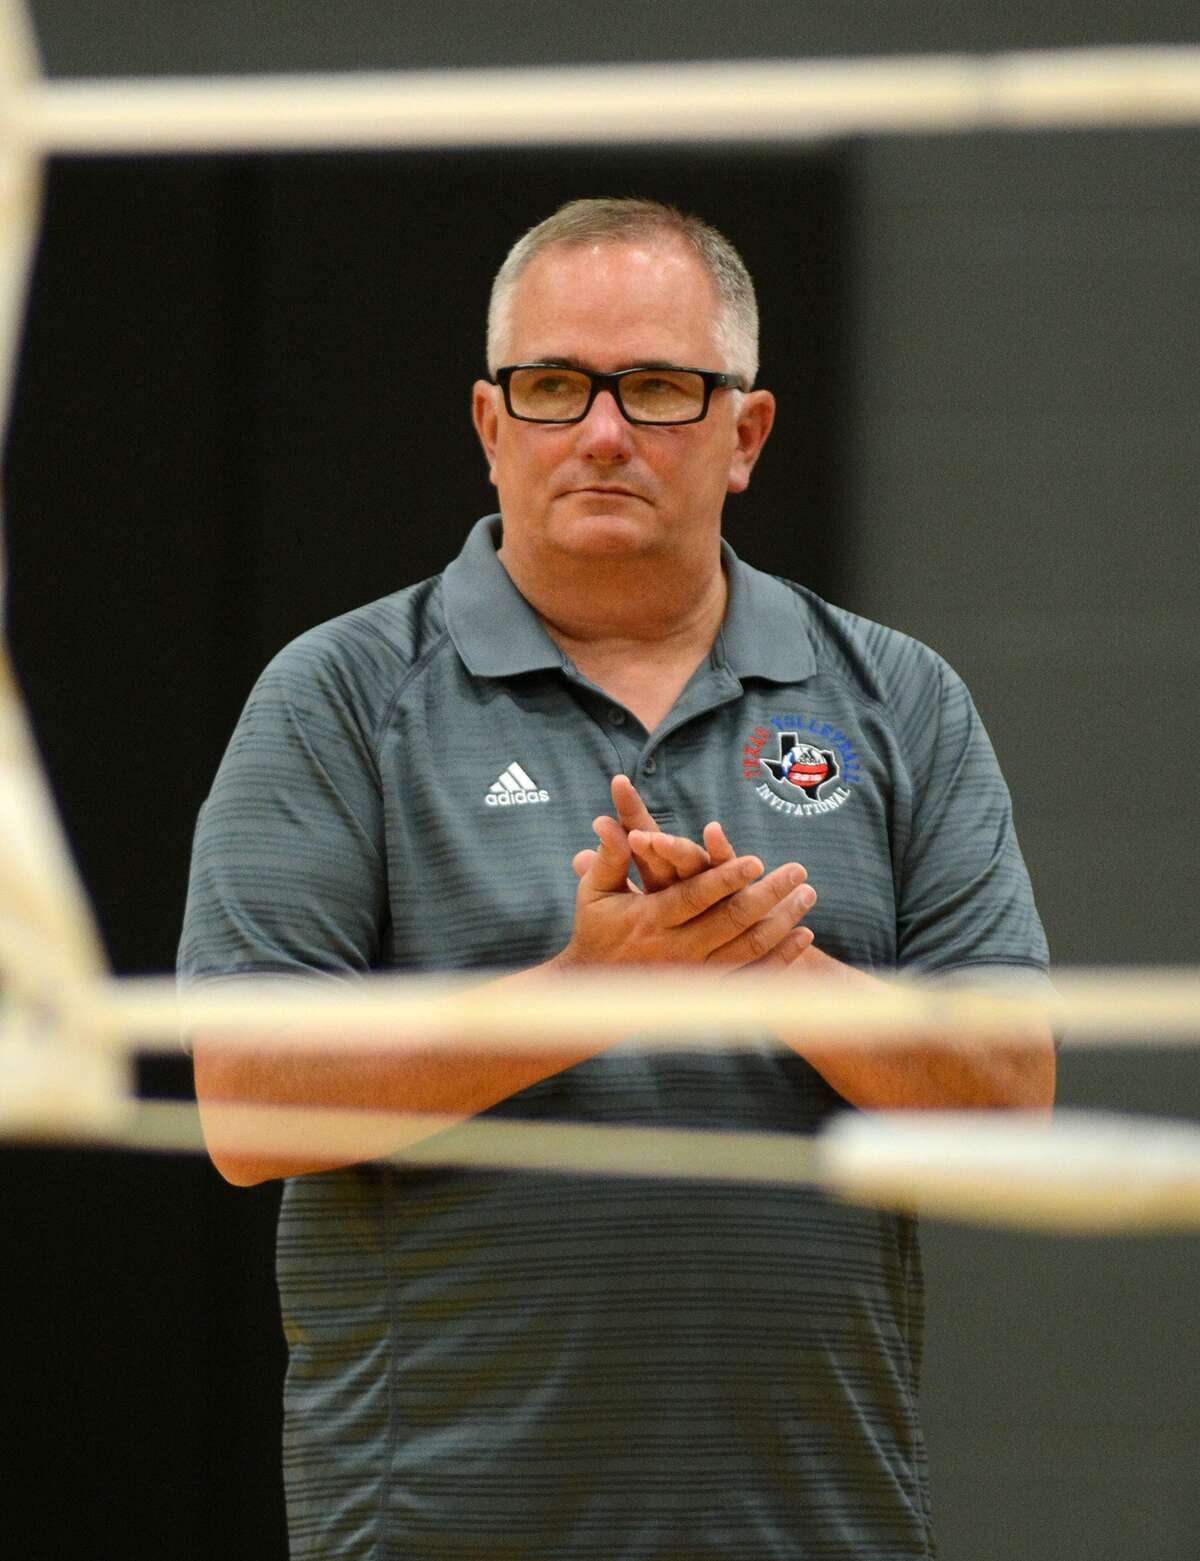 Pearland head volleyball coach John Turner watches his team during their scrimmage against Katy Taylor at Pearland High School on Aug. 8, 2015. (Photo by Jerry Baker/Freelance)